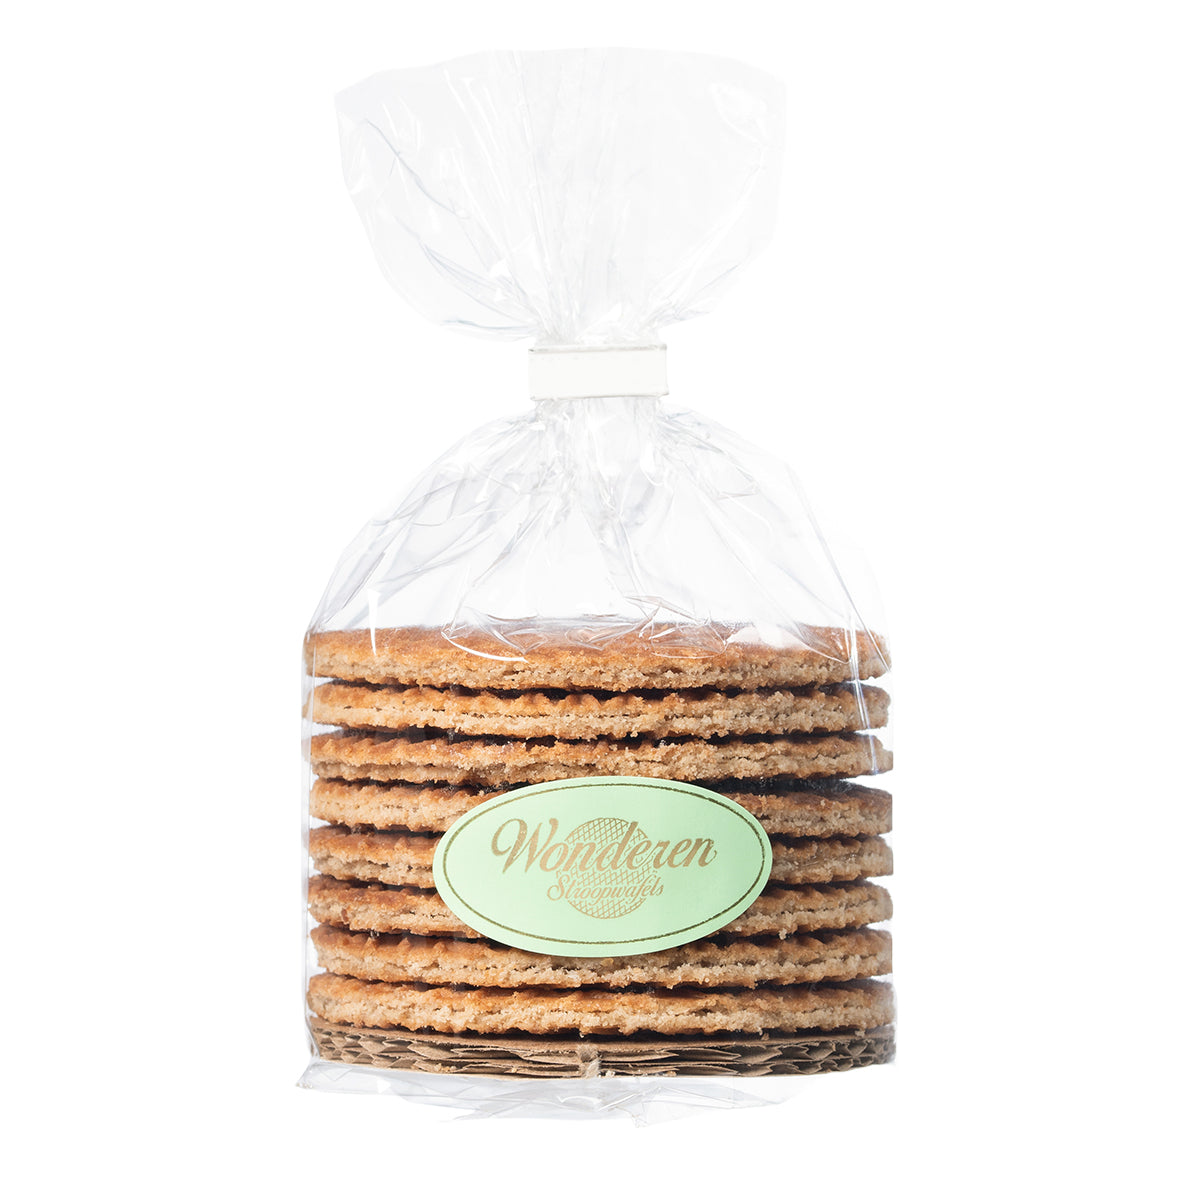 A stack of Wonderen Bundle 4x Stroopwafel 8 pack in a plastic bag on a white background.